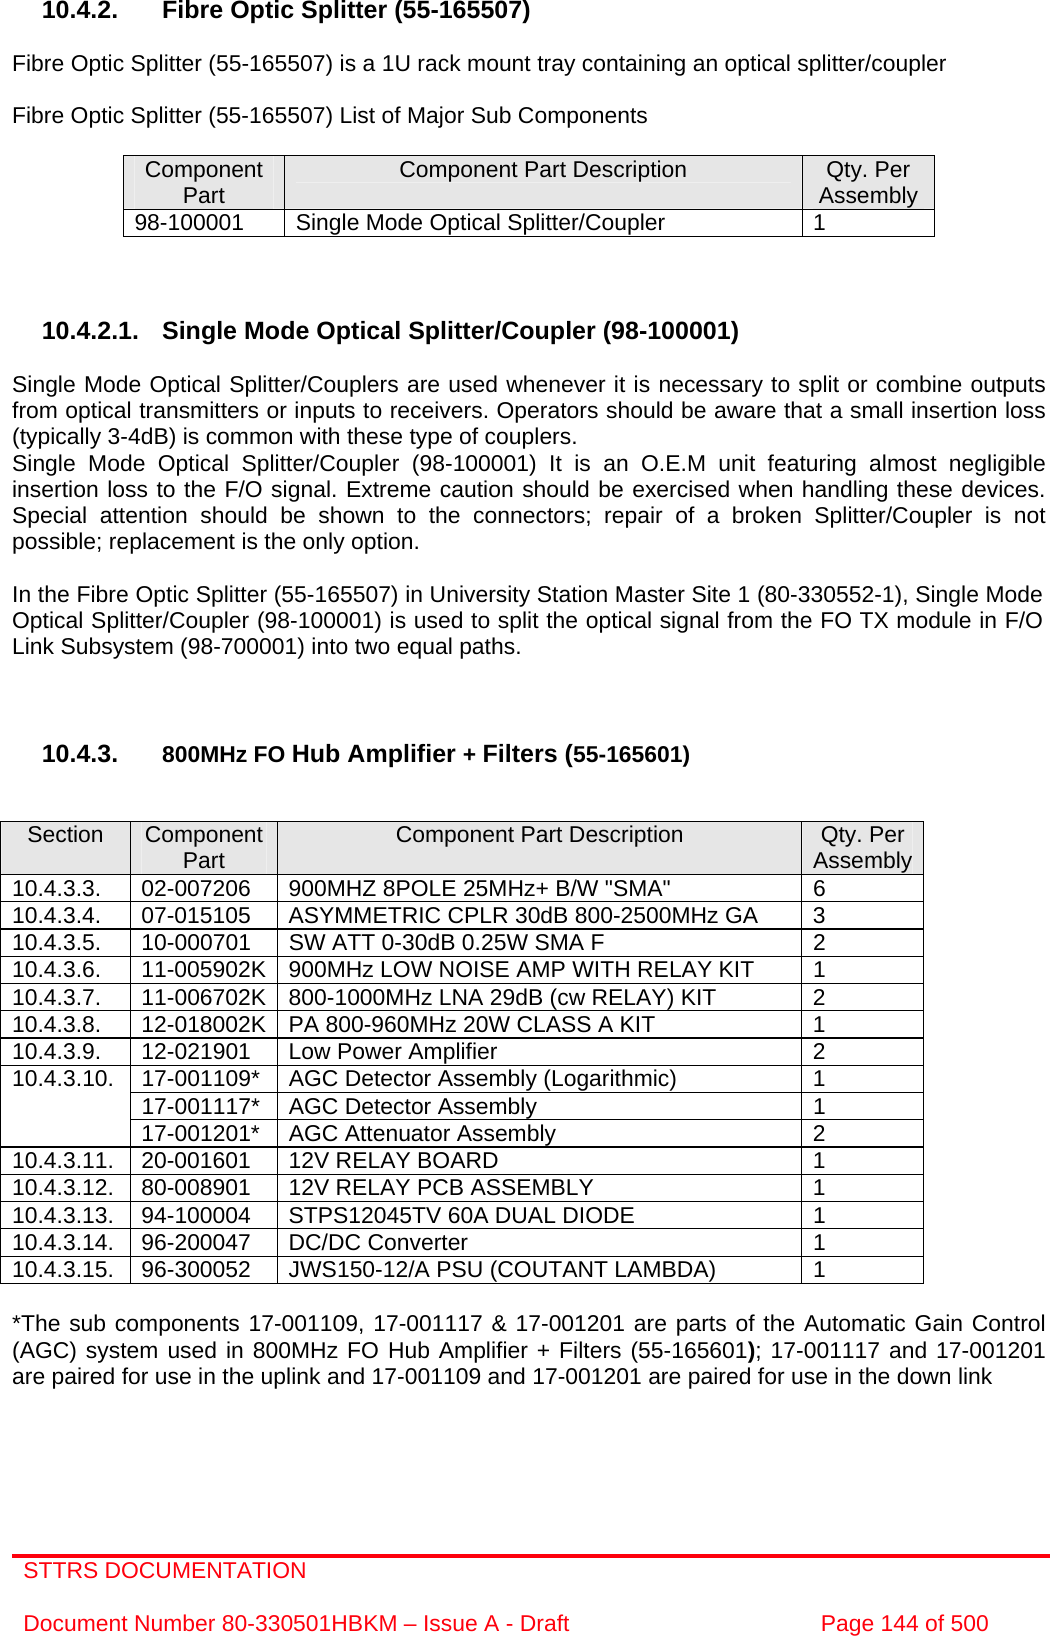 STTRS DOCUMENTATION  Document Number 80-330501HBKM – Issue A - Draft  Page 144 of 500   10.4.2.  Fibre Optic Splitter (55-165507)  Fibre Optic Splitter (55-165507) is a 1U rack mount tray containing an optical splitter/coupler  Fibre Optic Splitter (55-165507) List of Major Sub Components  Component Part  Component Part Description  Qty. Per Assembly 98-100001  Single Mode Optical Splitter/Coupler  1    10.4.2.1.  Single Mode Optical Splitter/Coupler (98-100001)  Single Mode Optical Splitter/Couplers are used whenever it is necessary to split or combine outputs from optical transmitters or inputs to receivers. Operators should be aware that a small insertion loss (typically 3-4dB) is common with these type of couplers.  Single Mode Optical Splitter/Coupler (98-100001) It is an O.E.M unit featuring almost negligible insertion loss to the F/O signal. Extreme caution should be exercised when handling these devices. Special attention should be shown to the connectors; repair of a broken Splitter/Coupler is not possible; replacement is the only option.  In the Fibre Optic Splitter (55-165507) in University Station Master Site 1 (80-330552-1), Single Mode Optical Splitter/Coupler (98-100001) is used to split the optical signal from the FO TX module in F/O Link Subsystem (98-700001) into two equal paths.    10.4.3.  800MHz FO Hub Amplifier + Filters (55-165601)   Section  Component Part  Component Part Description  Qty. Per Assembly 10.4.3.3.  02-007206  900MHZ 8POLE 25MHz+ B/W &quot;SMA&quot;  6 10.4.3.4.  07-015105  ASYMMETRIC CPLR 30dB 800-2500MHz GA  3 10.4.3.5.  10-000701  SW ATT 0-30dB 0.25W SMA F  2 10.4.3.6.  11-005902K 900MHz LOW NOISE AMP WITH RELAY KIT  1 10.4.3.7.  11-006702K 800-1000MHz LNA 29dB (cw RELAY) KIT  2 10.4.3.8.  12-018002K PA 800-960MHz 20W CLASS A KIT  1 10.4.3.9.  12-021901  Low Power Amplifier  2 17-001109*  AGC Detector Assembly (Logarithmic)  1 17-001117*  AGC Detector Assembly   1 10.4.3.10. 17-001201*  AGC Attenuator Assembly   2 10.4.3.11.  20-001601  12V RELAY BOARD  1 10.4.3.12.  80-008901  12V RELAY PCB ASSEMBLY  1 10.4.3.13.  94-100004  STPS12045TV 60A DUAL DIODE  1 10.4.3.14. 96-200047  DC/DC Converter  1 10.4.3.15.  96-300052  JWS150-12/A PSU (COUTANT LAMBDA)  1  *The sub components 17-001109, 17-001117 &amp; 17-001201 are parts of the Automatic Gain Control (AGC) system used in 800MHz FO Hub Amplifier + Filters (55-165601); 17-001117 and 17-001201 are paired for use in the uplink and 17-001109 and 17-001201 are paired for use in the down link    